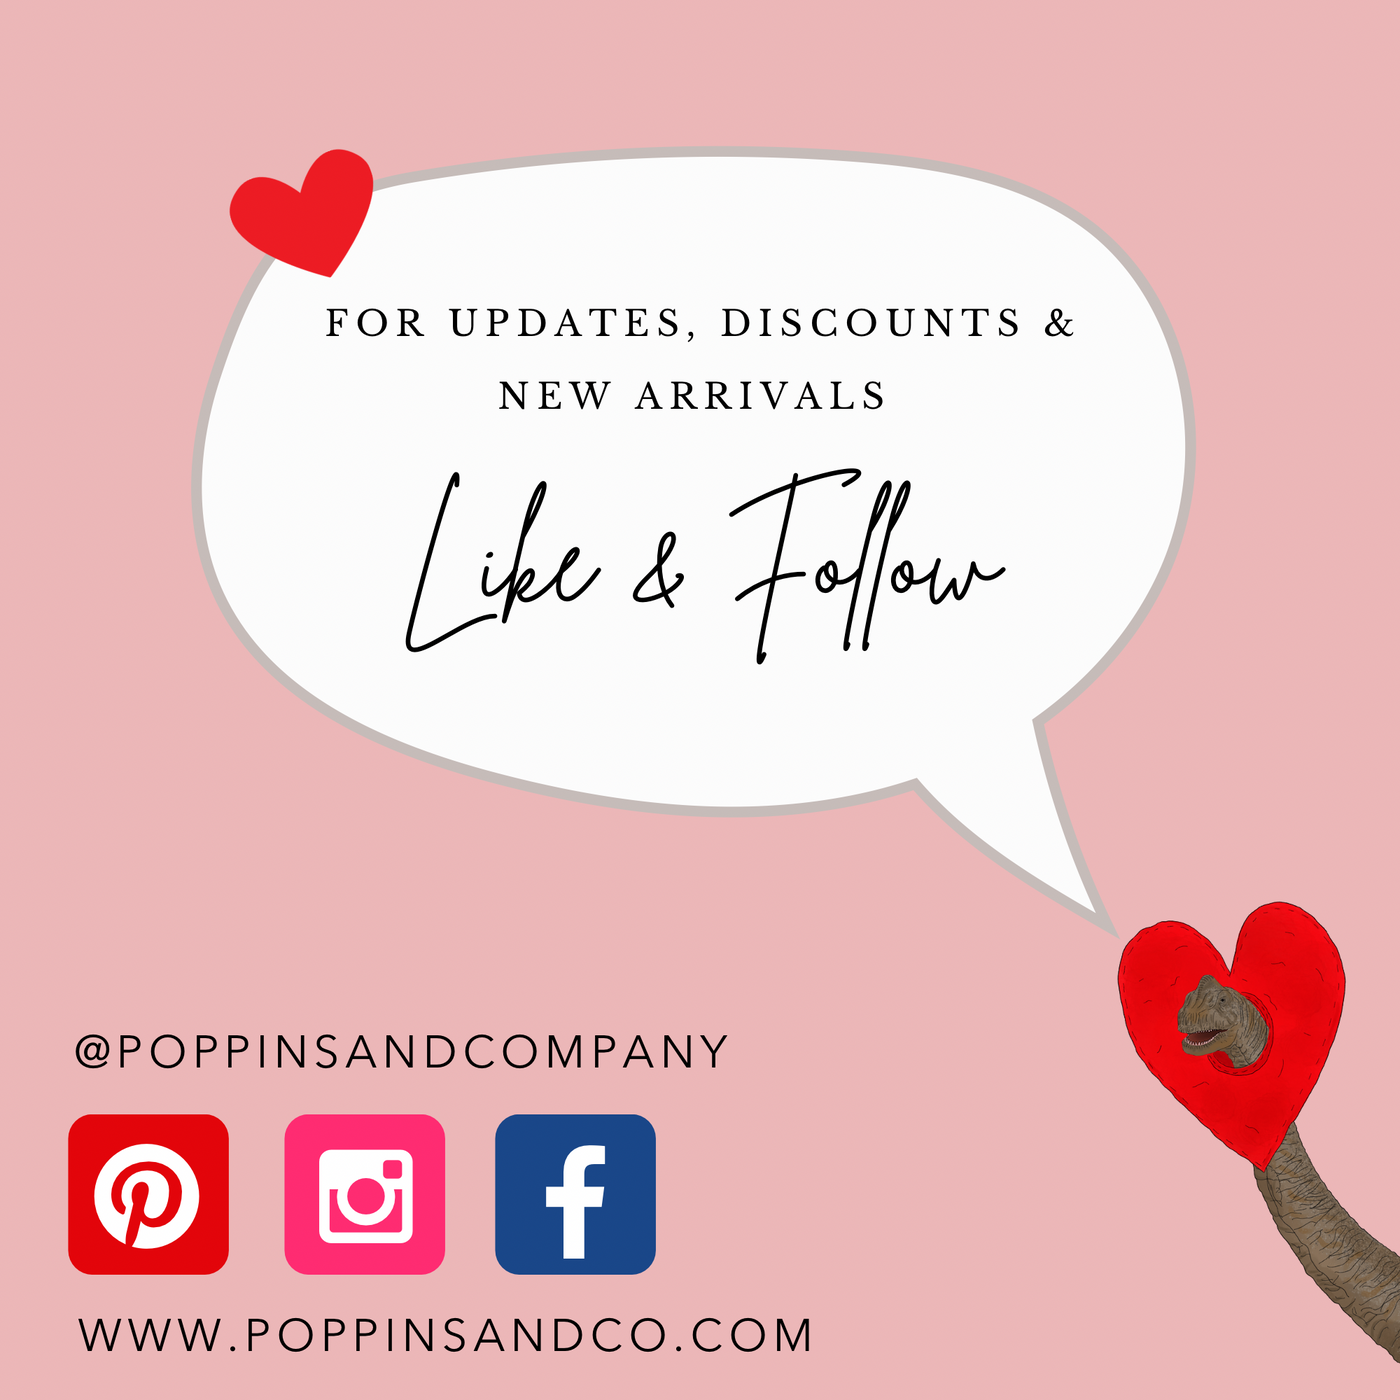 Social media account details for Poppins and Co. Like and follow on Pinterest, instagram and Facebook. social media handle @poppinsandcompany. Pink background image with a white speech bubble saying 'for updates, discounts and new arrivals, like and follow'. Speech bubble is coming from a brachiosaurus on the bottom right corner. He is wearing a red love heart costume around his head.